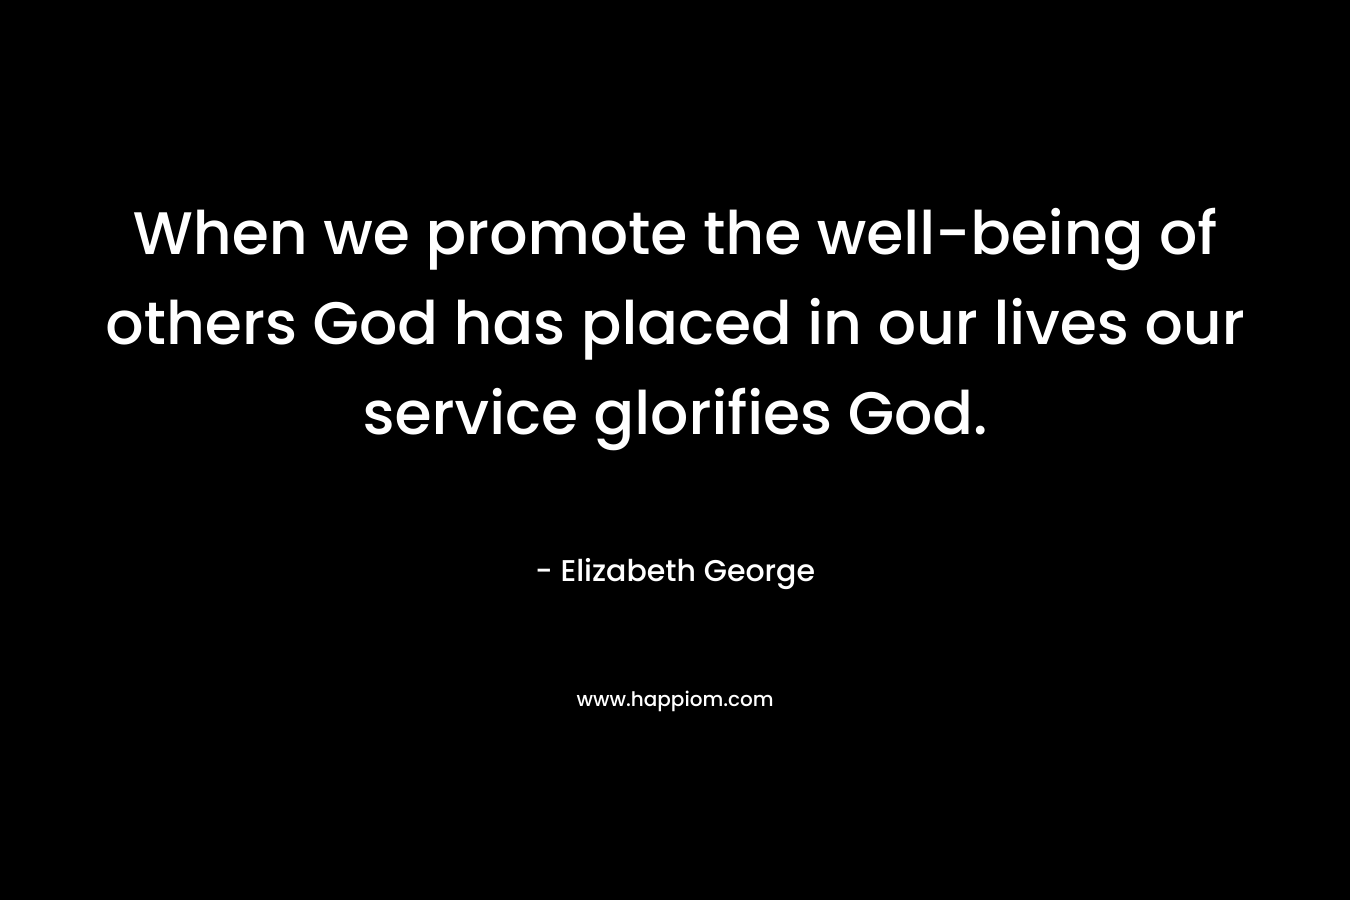 When we promote the well-being of others God has placed in our lives our service glorifies God.